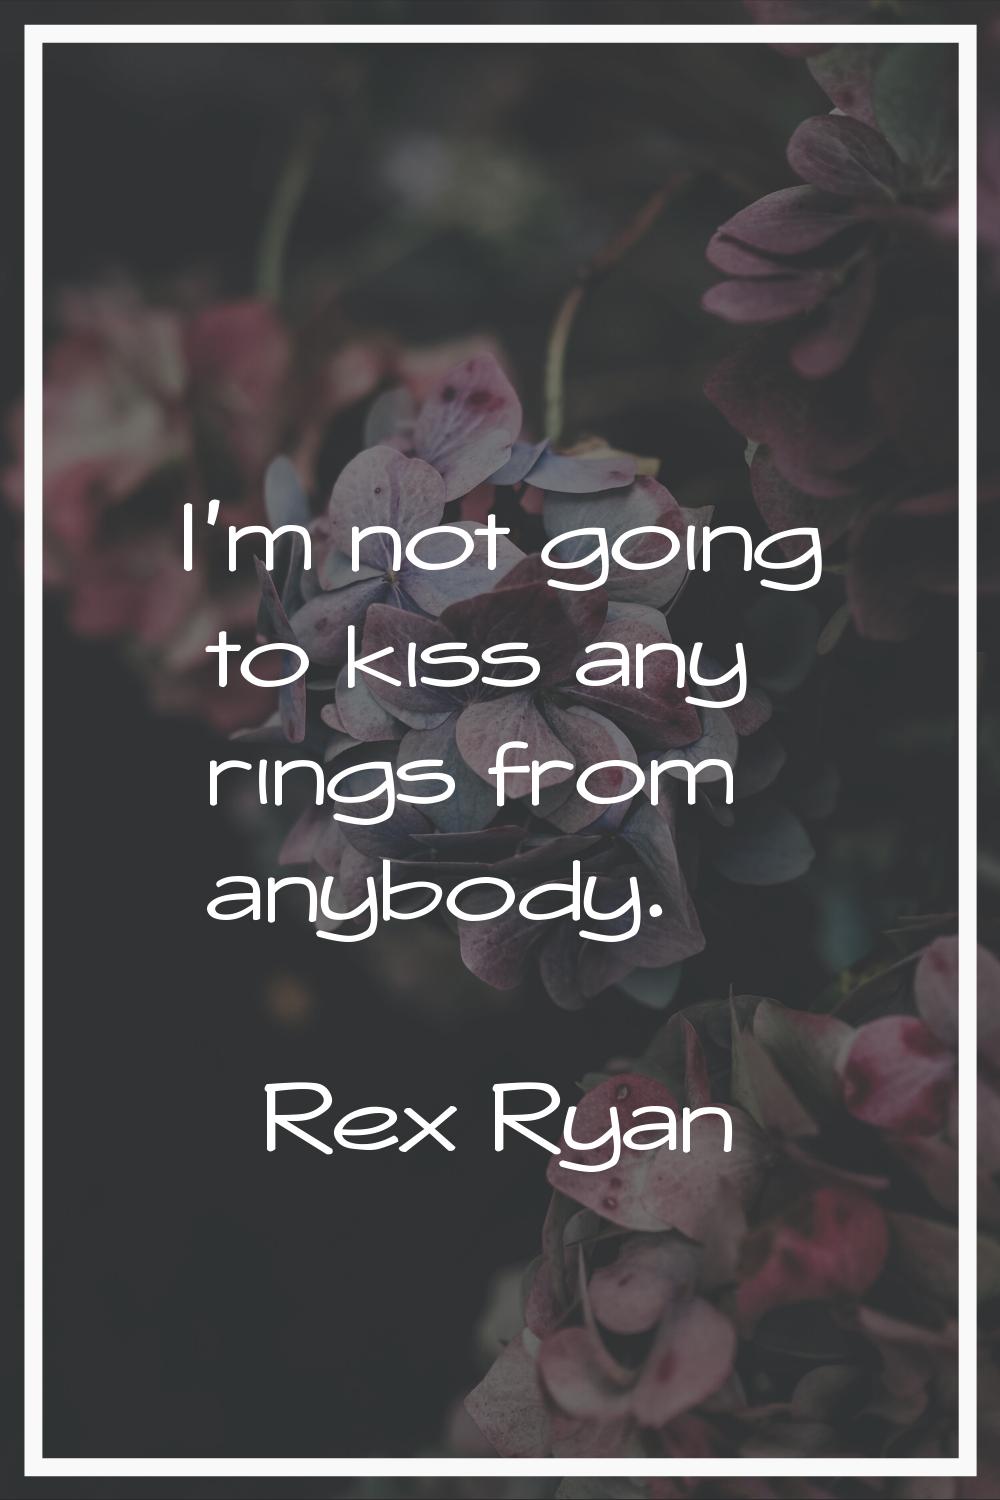 I'm not going to kiss any rings from anybody.